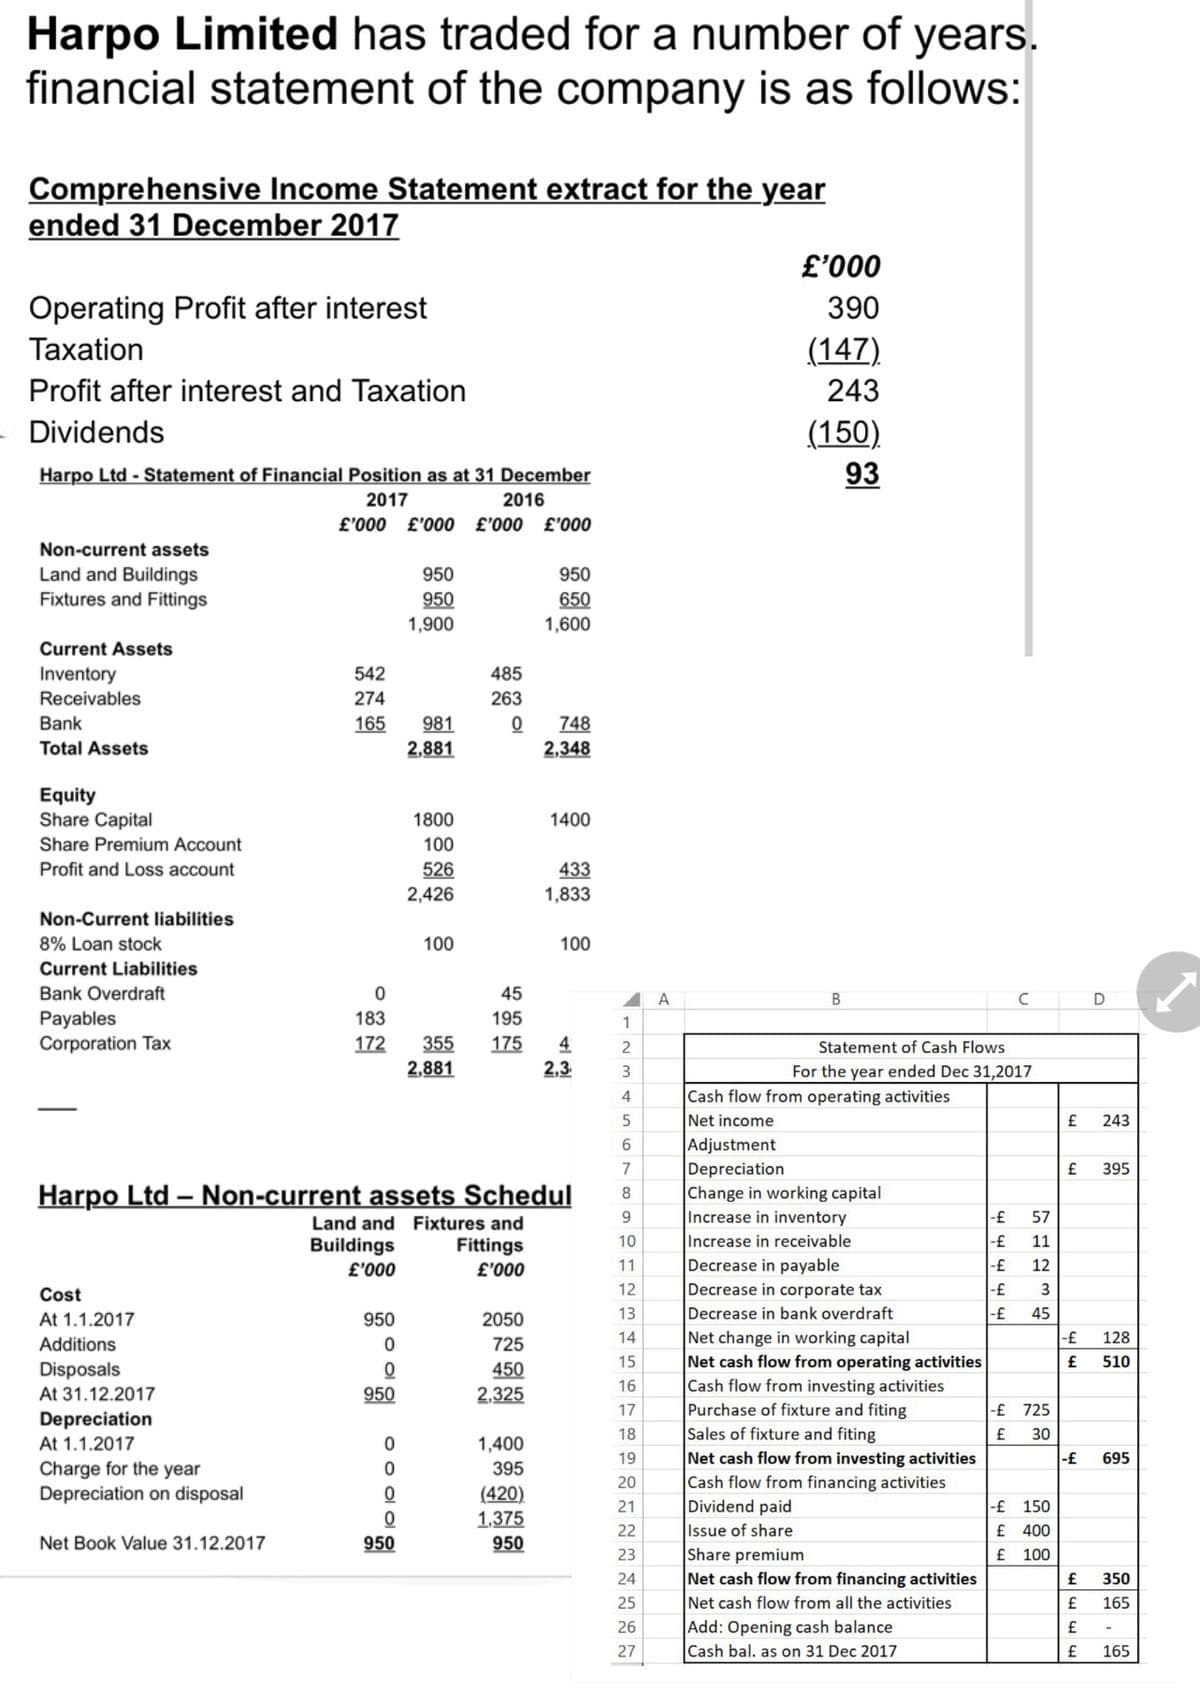 Harpo Limited has traded for a number of years.
financial statement of the company is as follows:
Comprehensive Income Statement extract for the year
ended 31 December 2017
Operating Profit after interest
Taxation
Profit after interest and Taxation
Dividends
Harpo Ltd - Statement of Financial Position as at 31 December
2017
2016
£'000 £'000 £'000 £'000
Non-current assets
Land and Buildings
Fixtures and Fittings
Current Assets
Inventory
Receivables
Bank
Total Assets
Equity
Share Capital
Share Premium Account
Profit and Loss account
Non-Current liabilities
8% Loan stock
Current Liabilities
Bank Overdraft
Payables
Corporation Tax
Cost
At 1.1.2017
Additions
Disposals
At 31.12.2017
Depreciation
At 1.1.2017
Charge for the year
Depreciation on disposal
Net Book Value 31.12.2017
542
274
165 981
2,881
0
183
172
950
950
1,900
950
0
0
950
0
0
0
0
950
1800
100
526
2,426
100
485
263
0
45
195
355 175
2,881
Harpo Ltd - Non-current assets Schedul
Land and Fixtures and
Buildings
£'000
Fittings
£'000
2050
725
450
2,325
950
650
1,600
1,400
395
(420)
1,375
950
748
2,348
1400
433
1,833
100
4
2,3
1
2
3
4
5
6
7
8
9
10
11
12
13
14
15
16
17
18
19
20
21
22
23
24
25
26
27
A
£'000
390
(147).
243
Adjustment
Depreciation
(150)
93
B
Cash flow from operating activities
Net income
Statement of Cash Flows
For the year ended Dec 31,2017
Change in working capital
Increase in inventory
Increase in receivable
Decrease in payable
Decrease in corporate tax
Decrease in bank overdraft
Net change in working capital
Net cash flow from operating activities
Cash flow from investing activities
Purchase of fixture and fiting
Sales of fixture and fiting
Net cash flow from investing activities
Cash flow from financing activities
Dividend paid
Issue of share
Share premium
Net cash flow from financing activities
Net cash flow from all the activities
Add: Opening cash balance
Cash bal. as on 31 Dec 2017
બ બ બ બ બ
-£
-£
C
44
71235
11
45
-£ 725
30
-£ 150
£ 400
£ 100
£
4
-£
£
444
243
£
395
-£ 695
128
510
350
165
£ 165